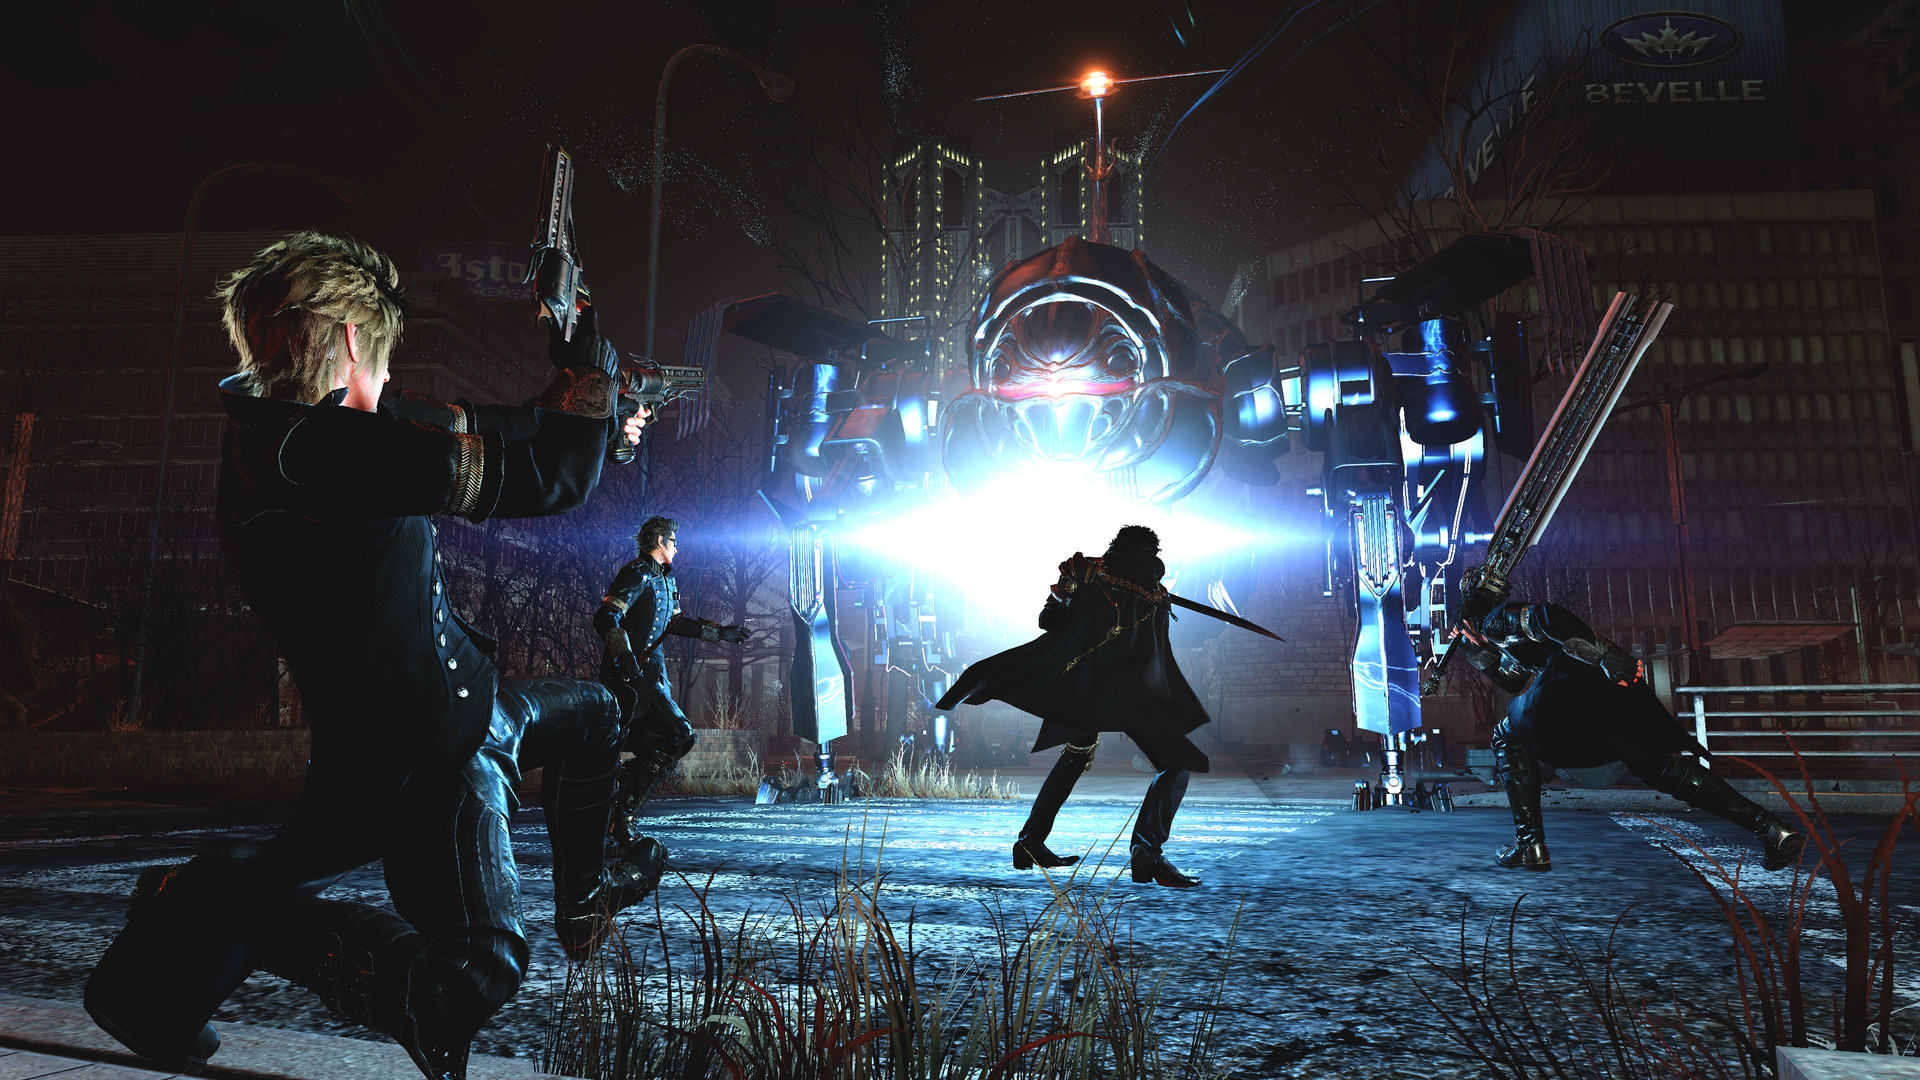 Final Fantasy Xv Has Sold A Million Copies On Steam Pcgamesn